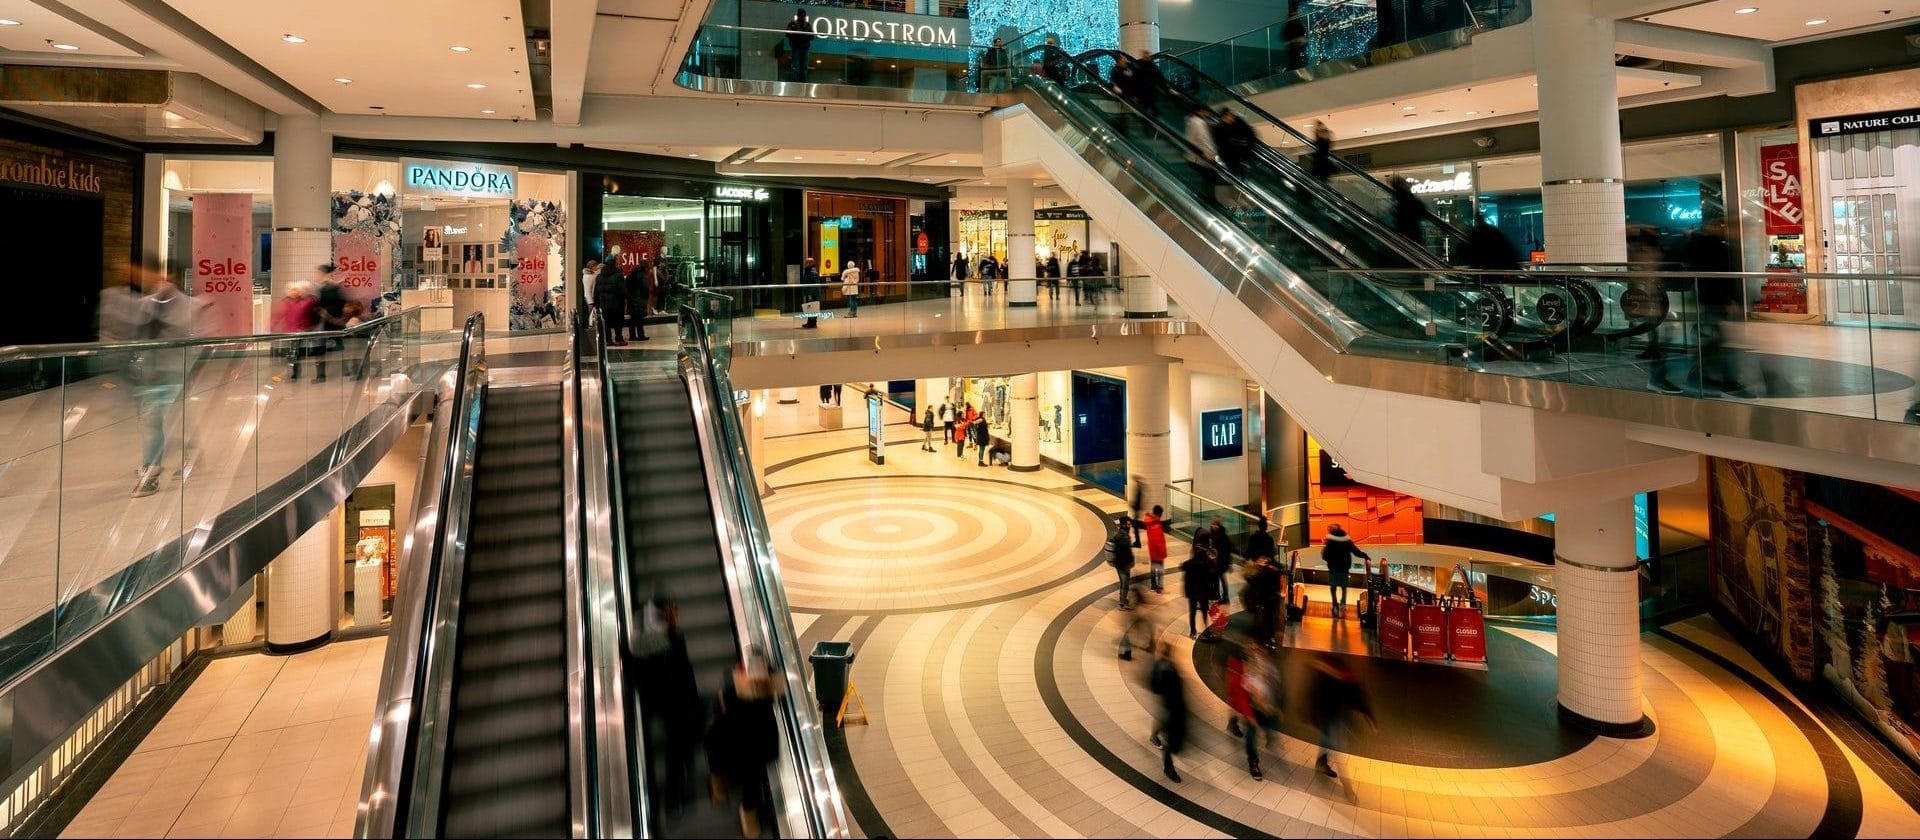 Proximity marketing may be the future of retailers and shopping malls.